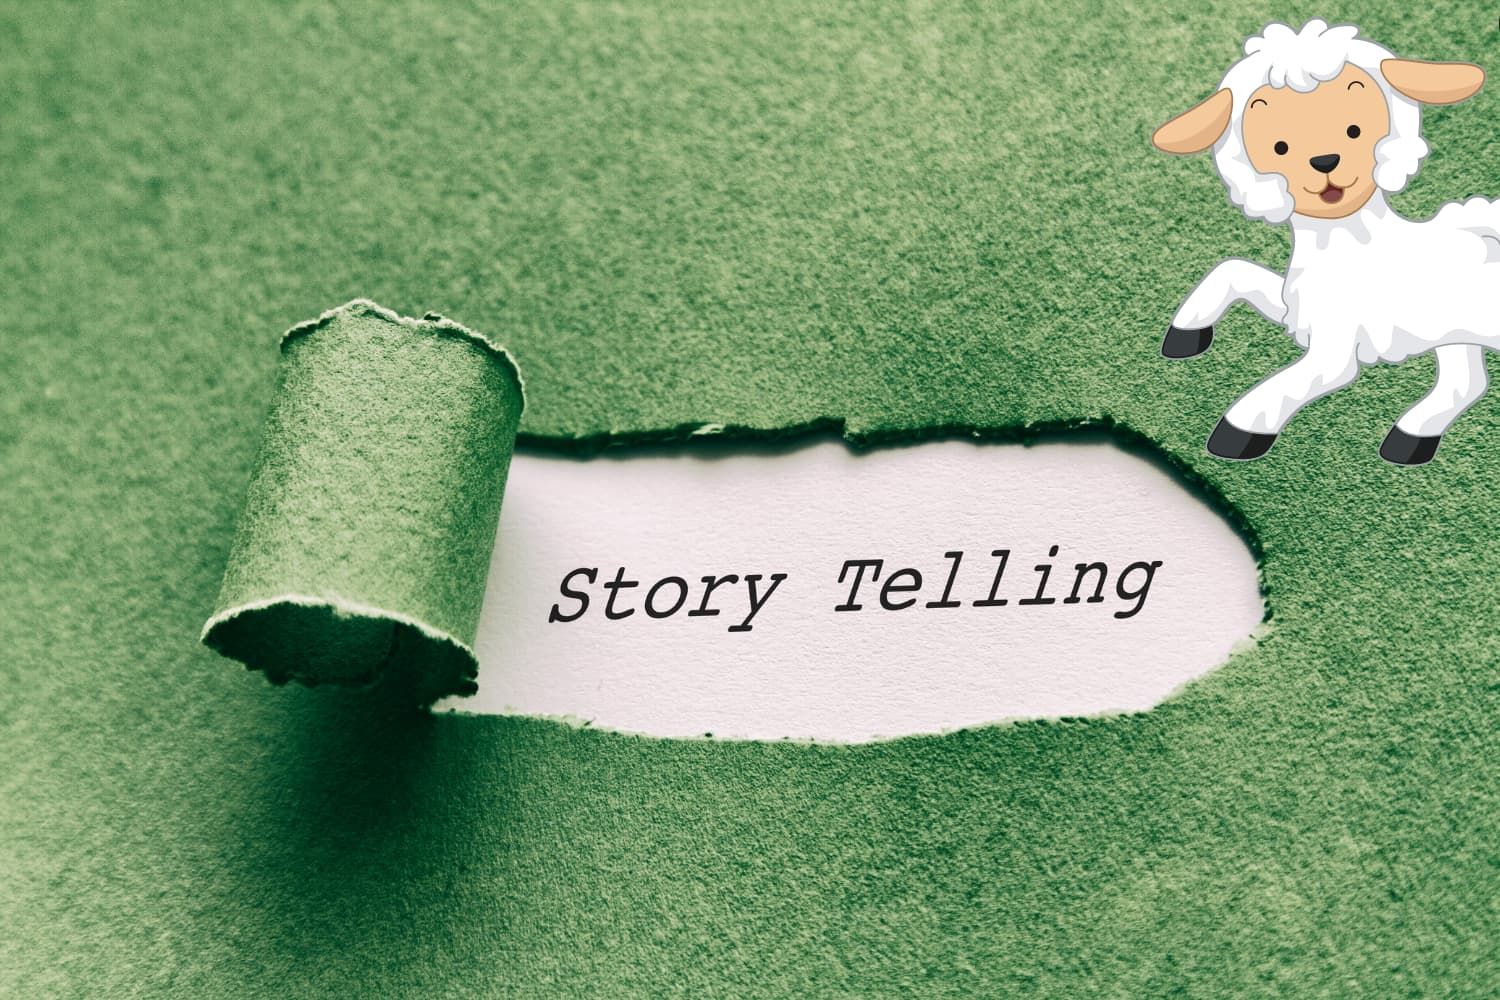 Storytelling%20tips%20-%20NT%20Parable%20of%20the%20lost%20sheep%20-%20Four%20tips%20to%20help%20you%20tell%20the%20story-0b70d295 Jesus - His parables